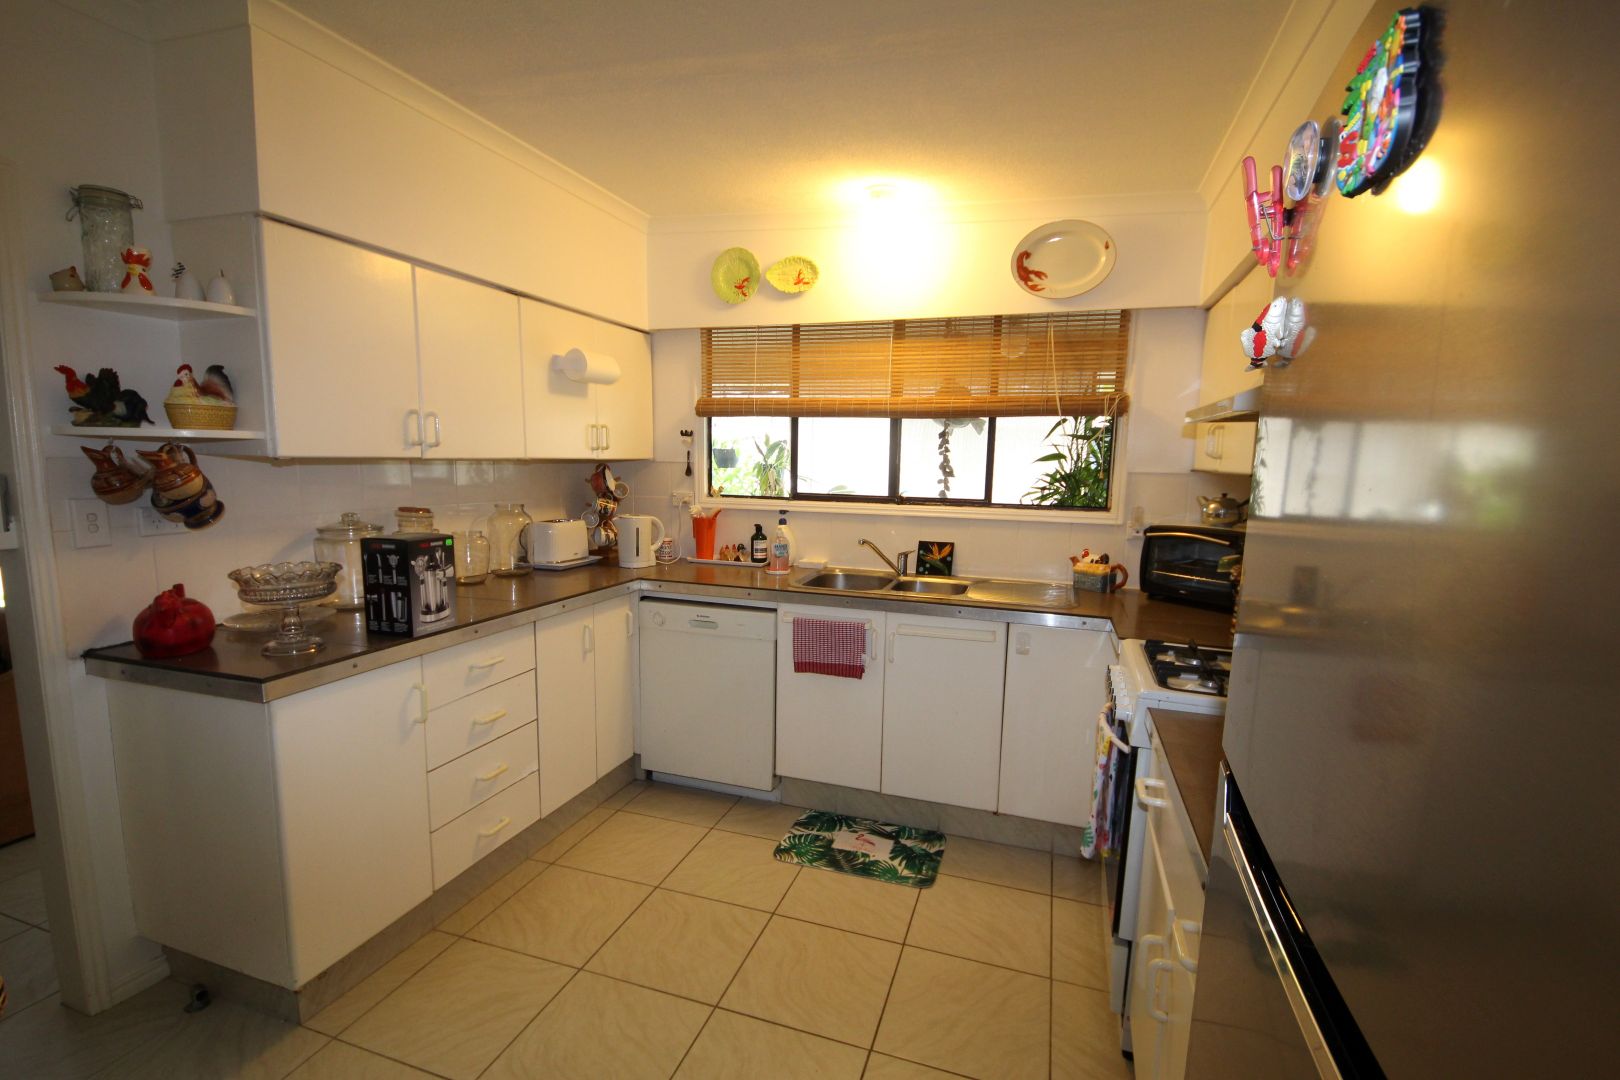 230/112-122 Dry Dock Road, Tweed Heads South NSW 2486, Image 1